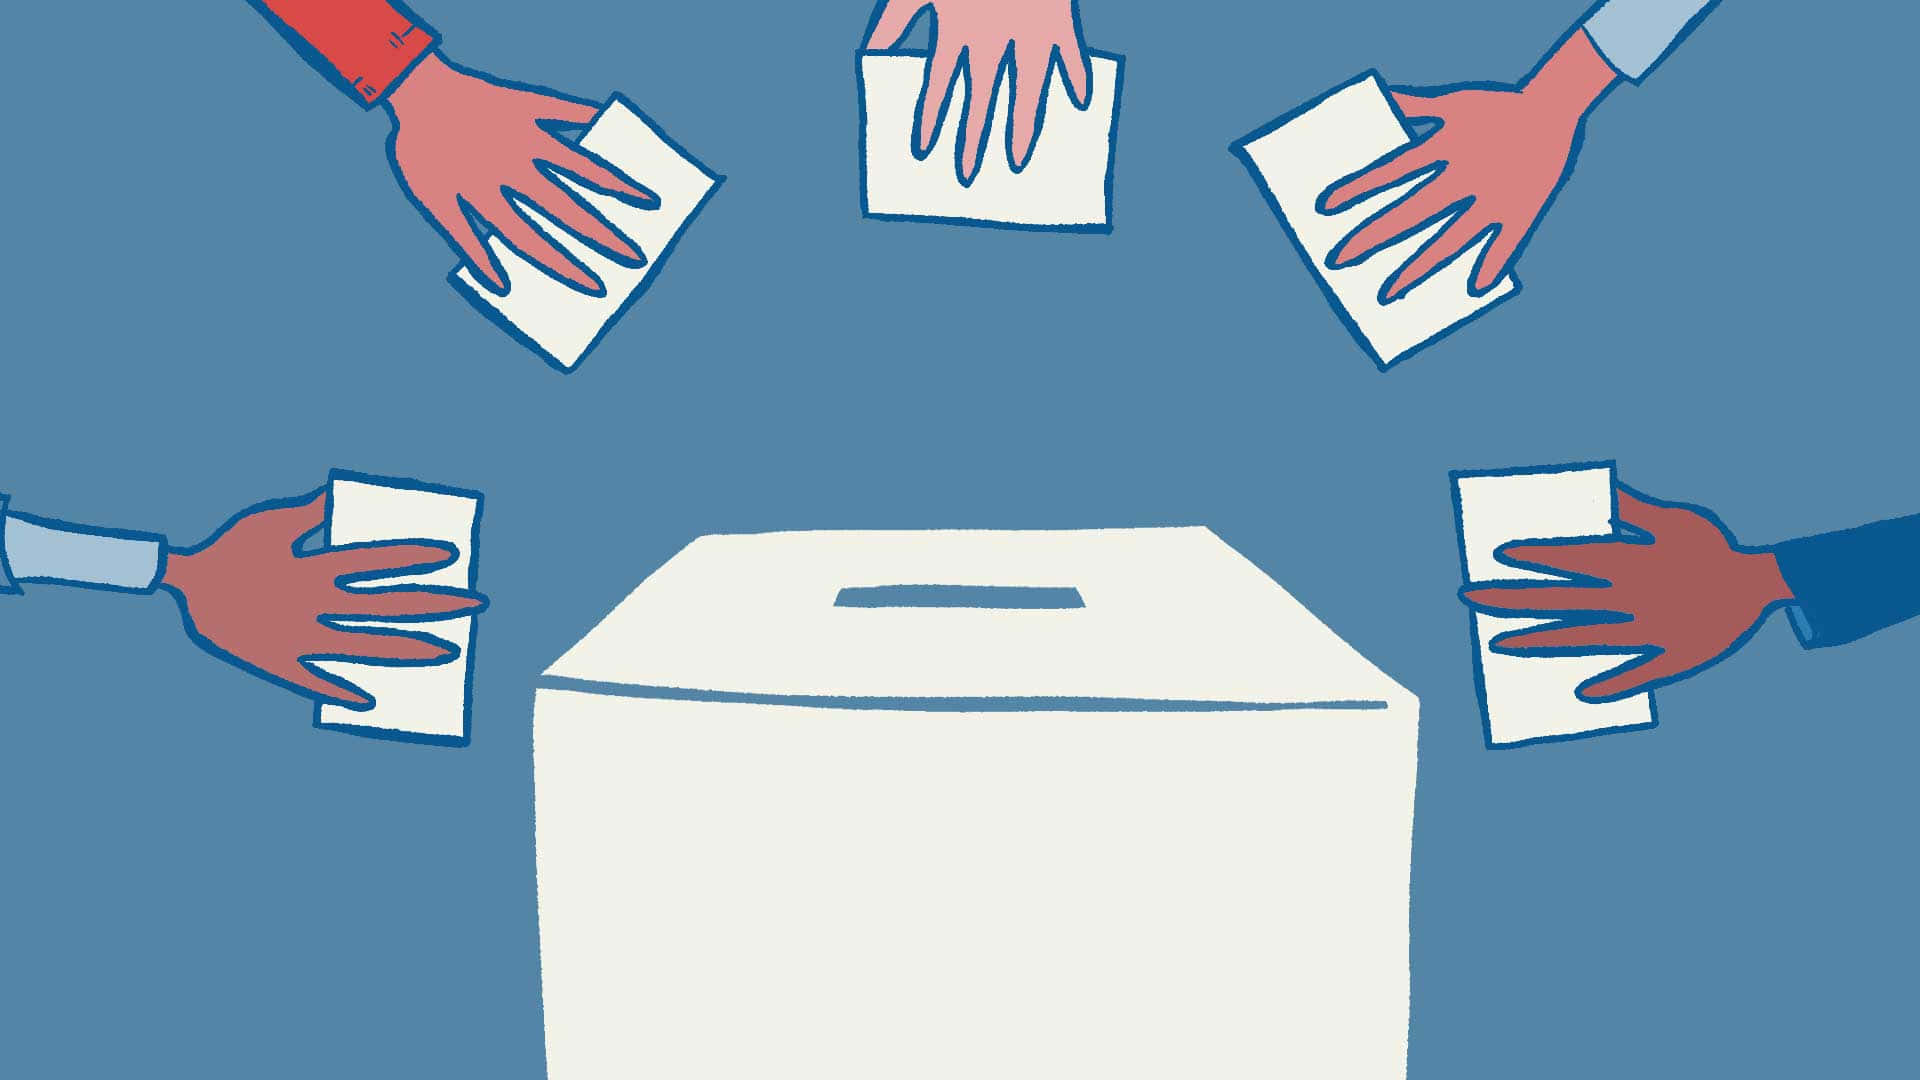 A Group Of Hands Reaching Into A Voting Box